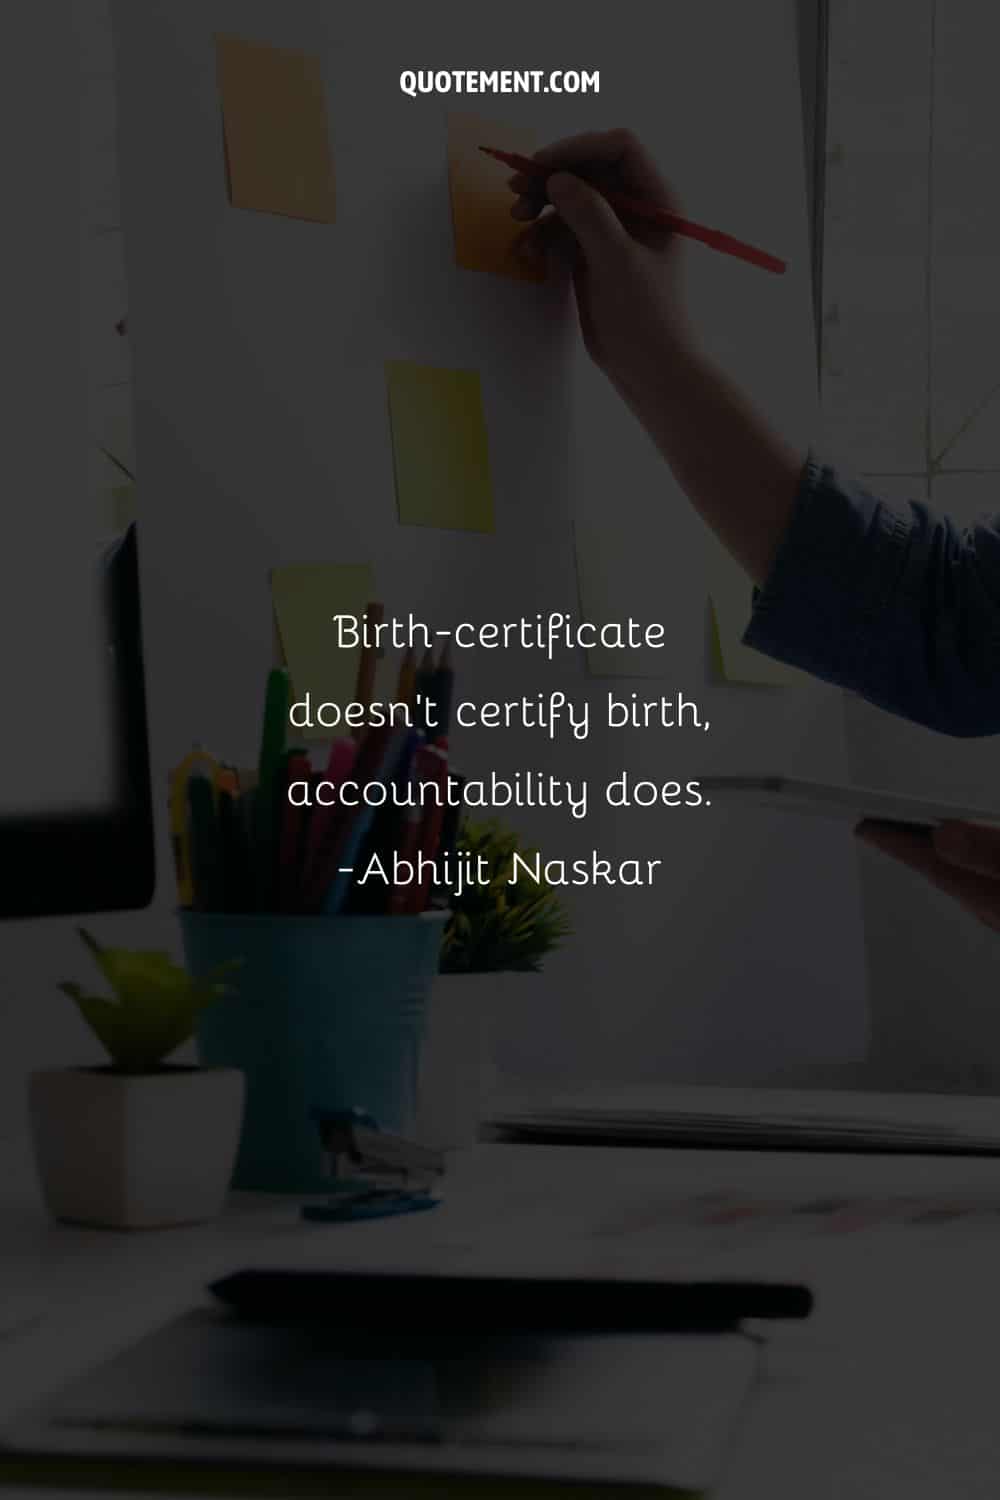 Birth-certificate doesn't certify birth, accountability does